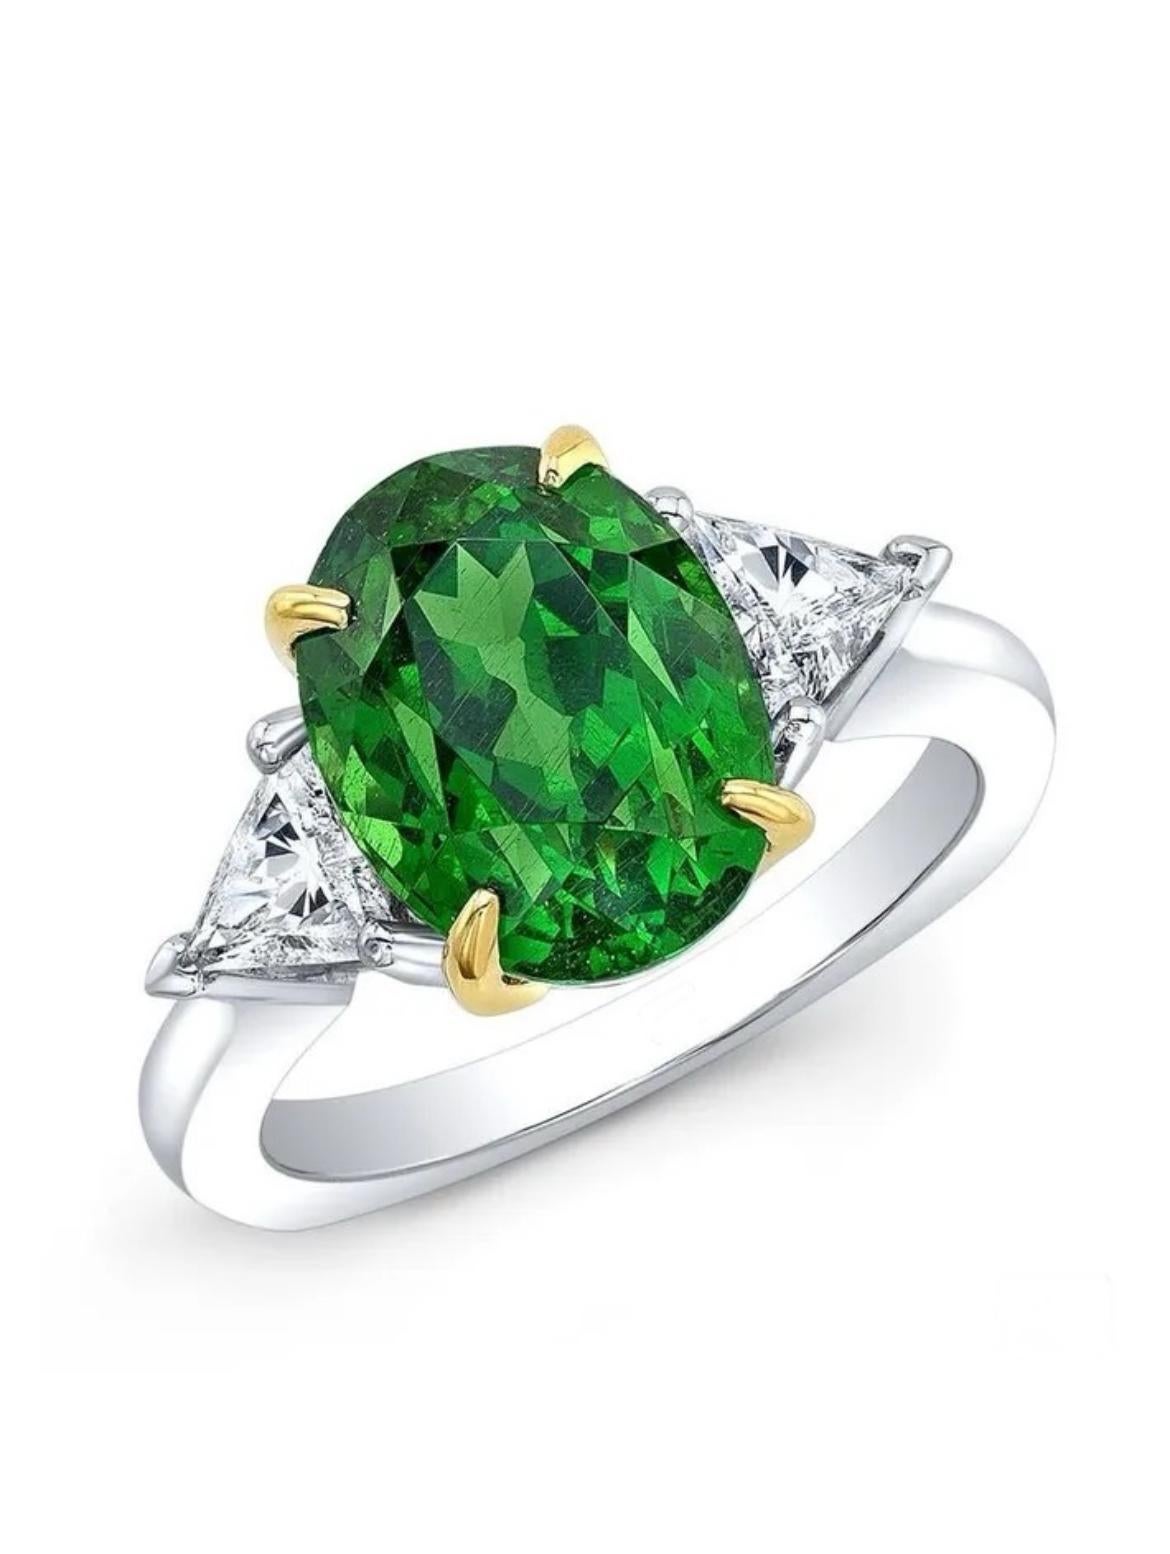 Exceptionally rare 6.26-carat, Tsavorite Garnet is flanked by two trillion-cut diamonds totaling 0.51 carats. This absolutely gorgeous, vibrant, and electric Tsavorite is presented in platinum with 18K yellow gold and is GIA certified. 